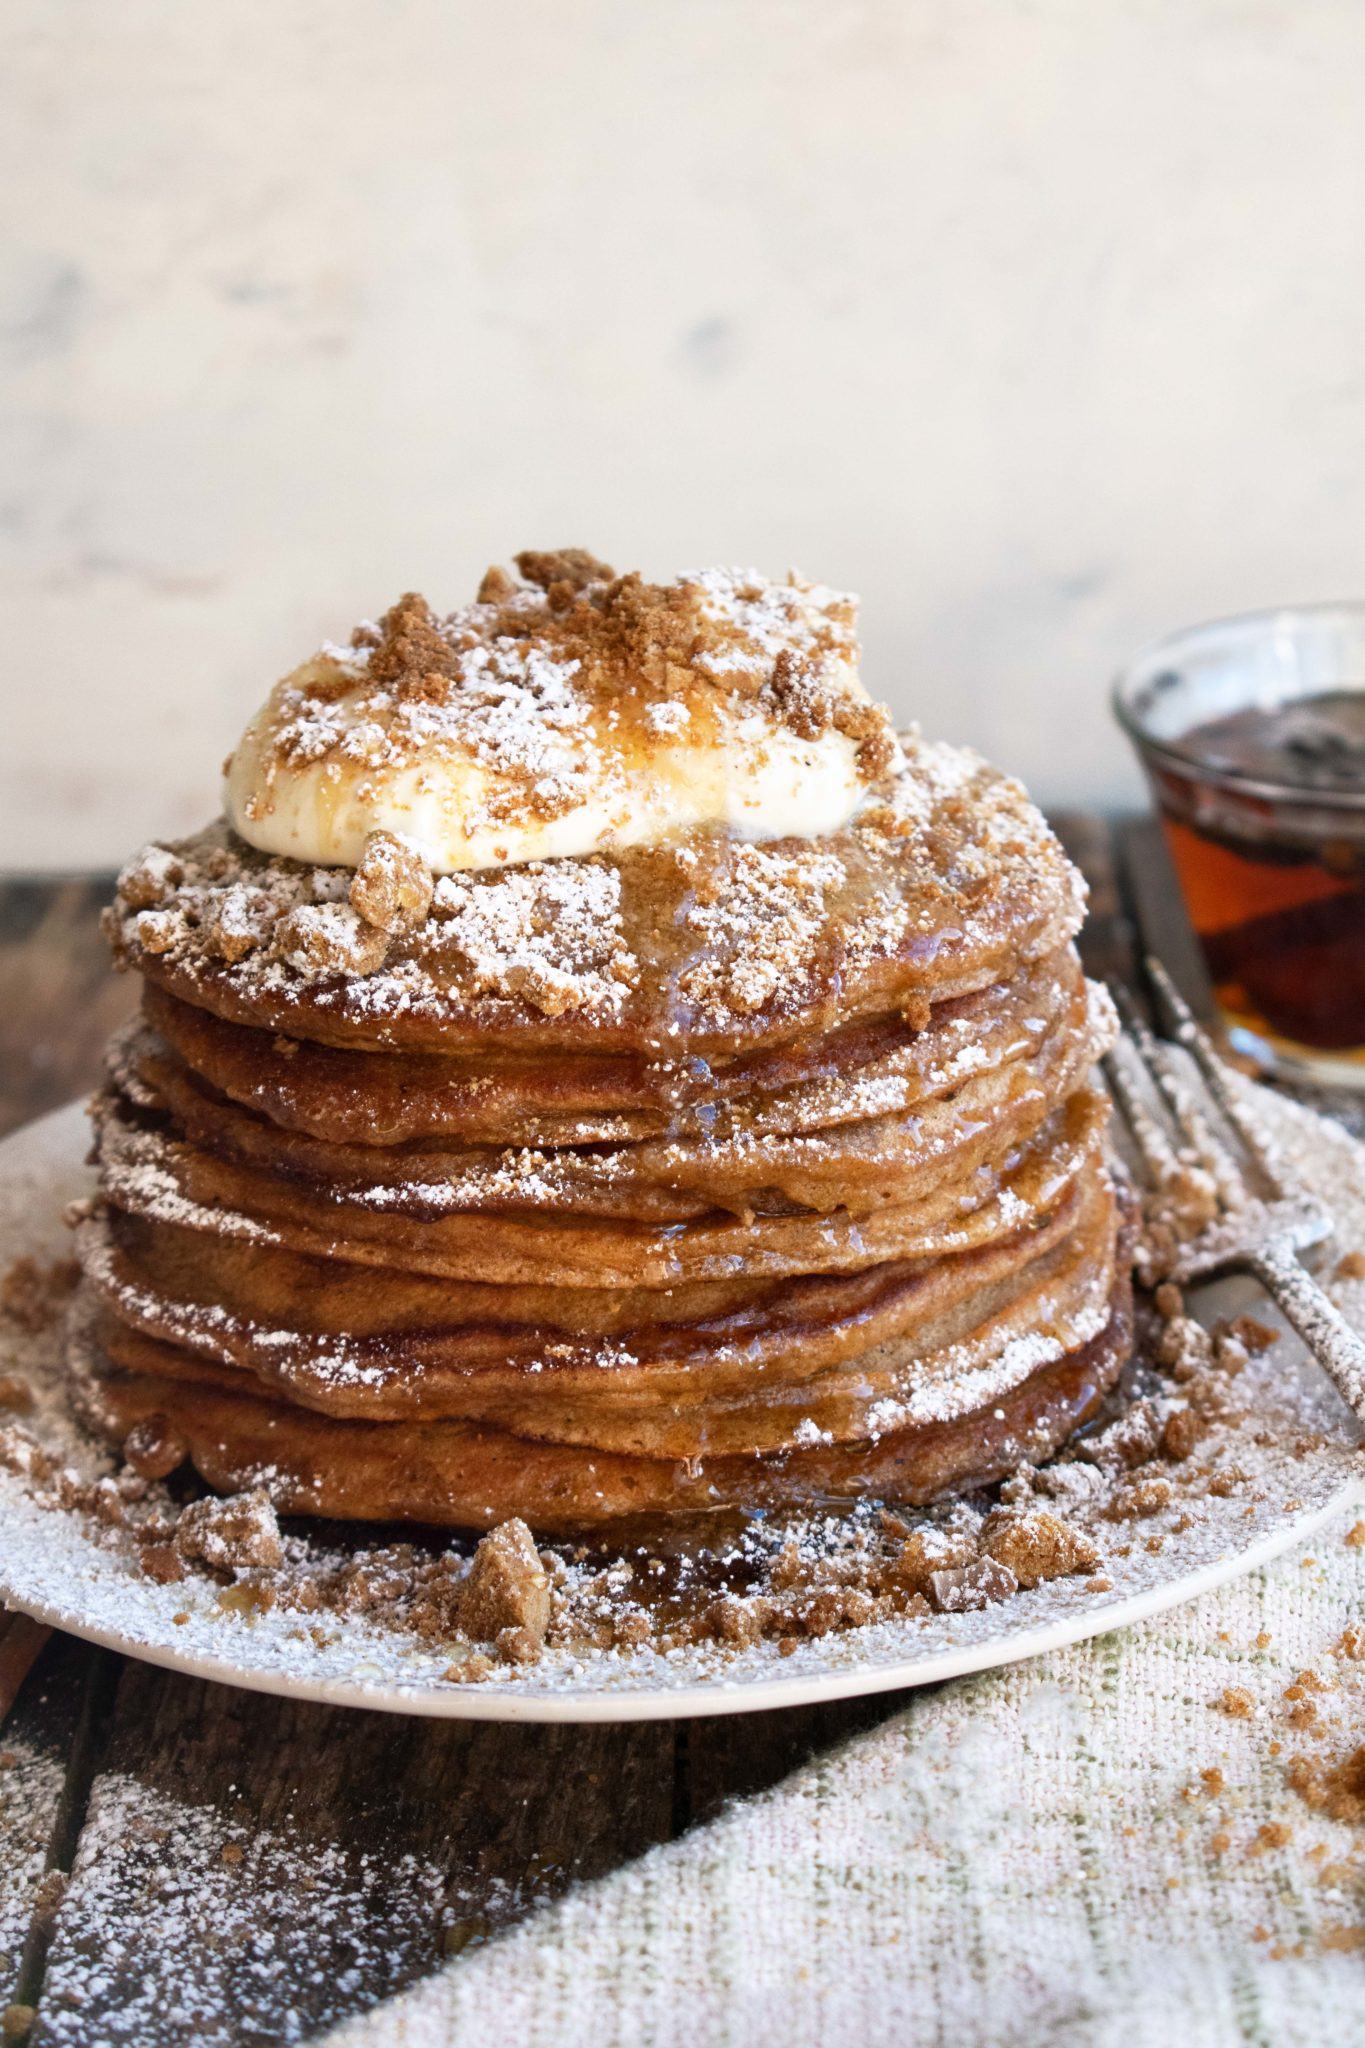 Gingerbread Pancakes with Spiced Syrup - The Original Dish